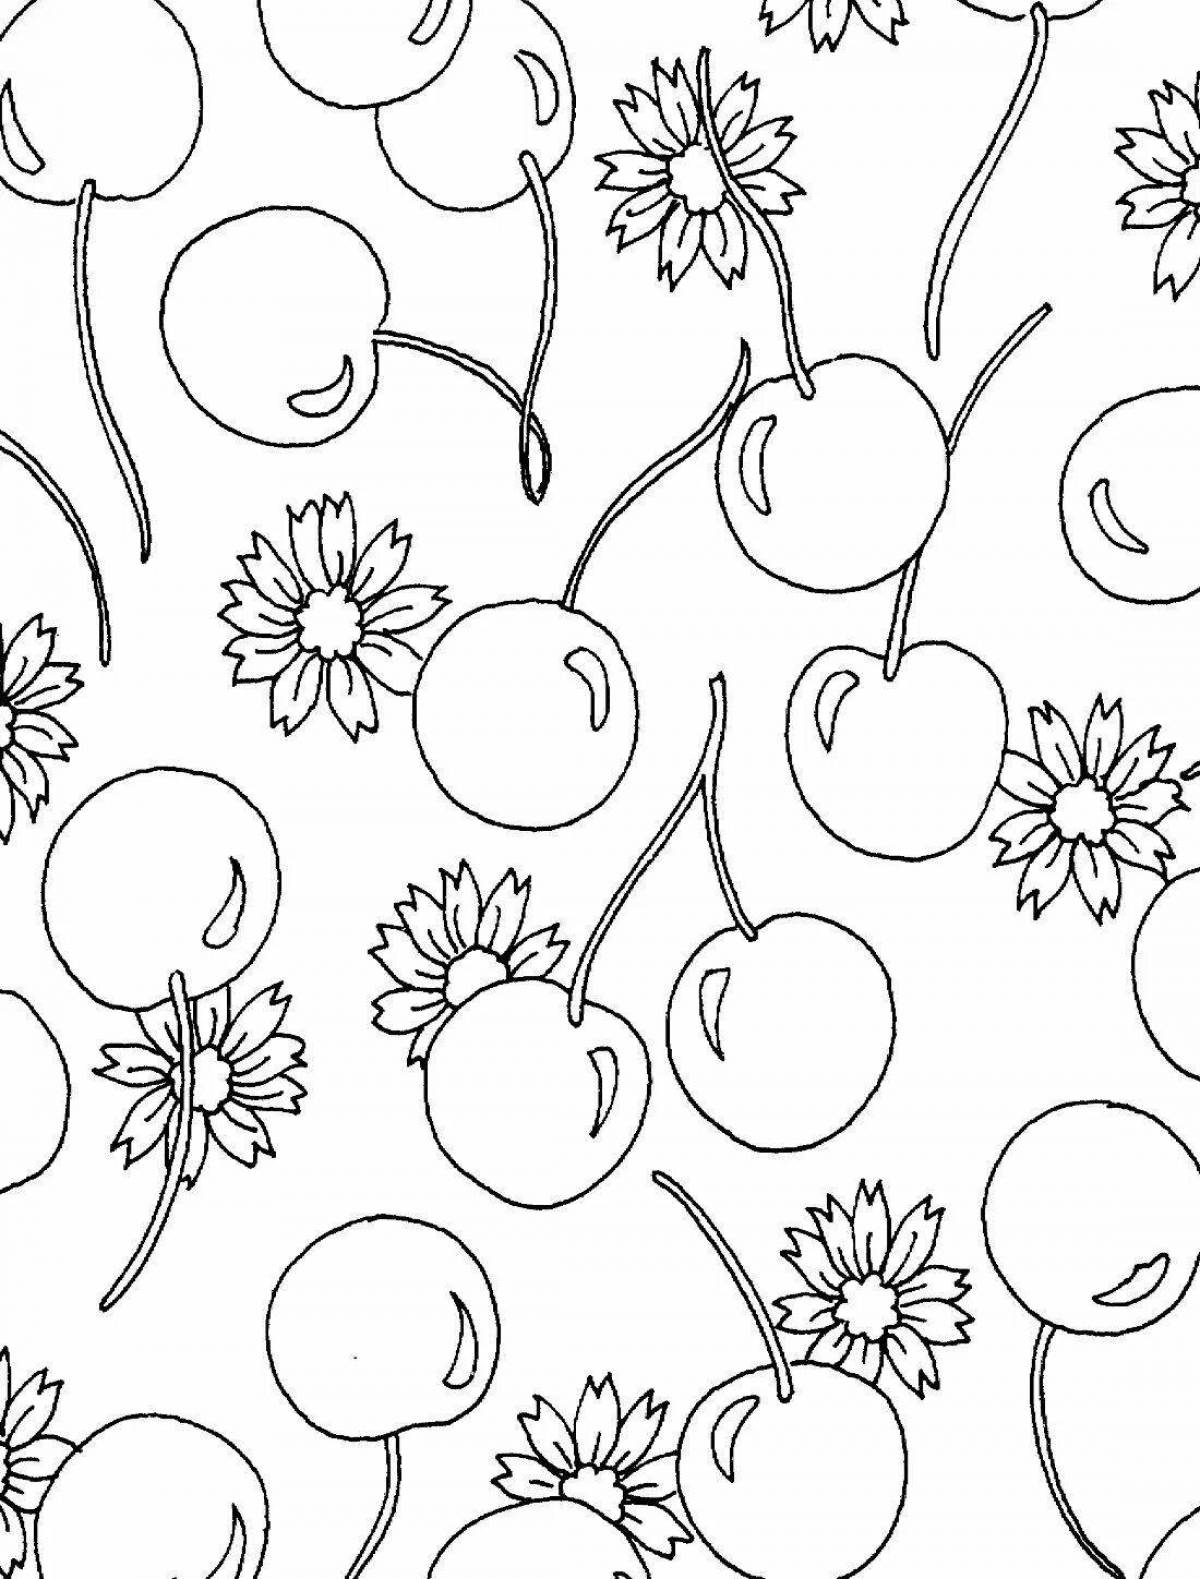 Inspiring coloring pages for kids